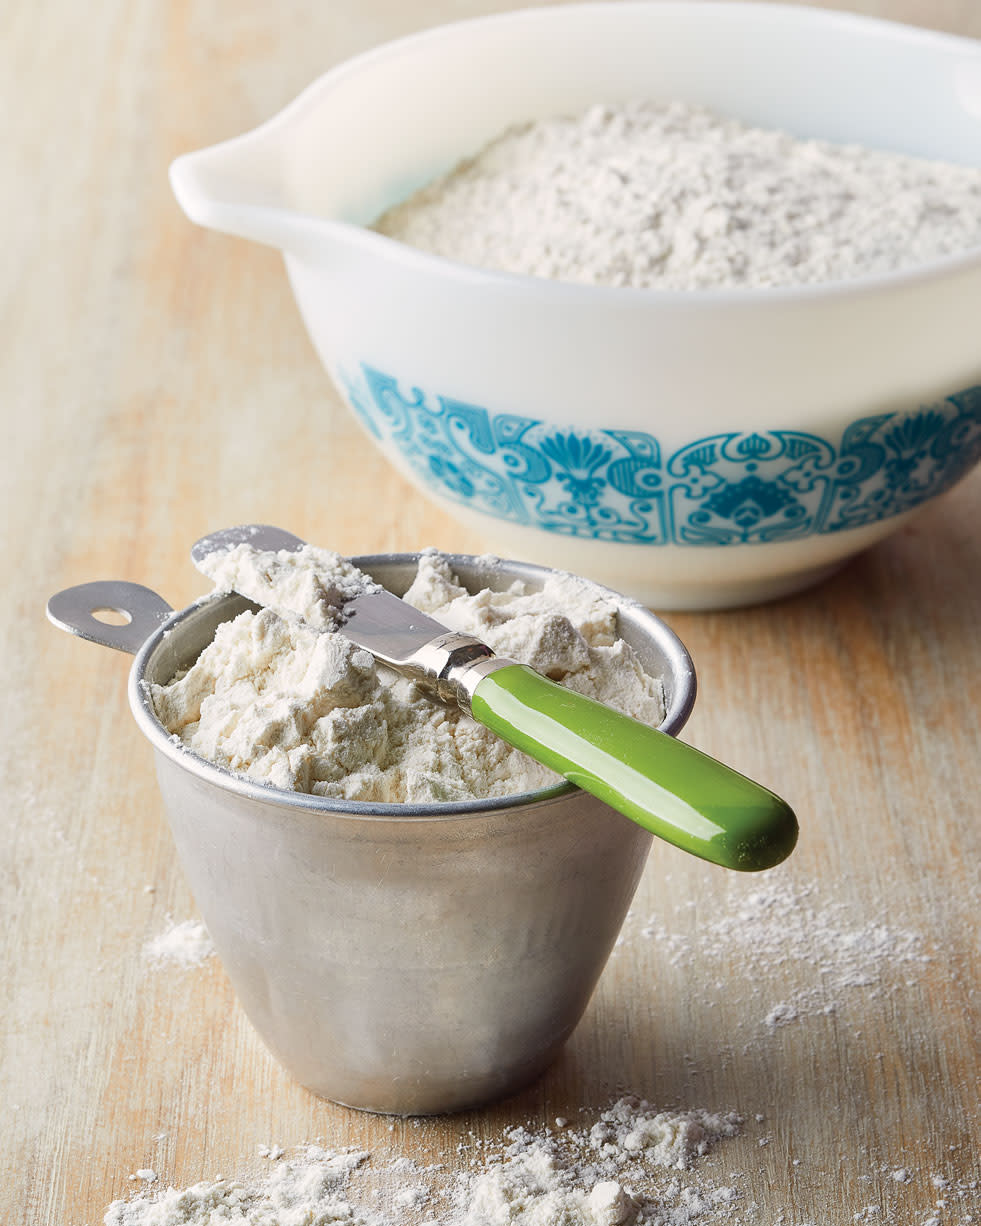 Bleached vs. Unbleached Flour: What's the Difference?